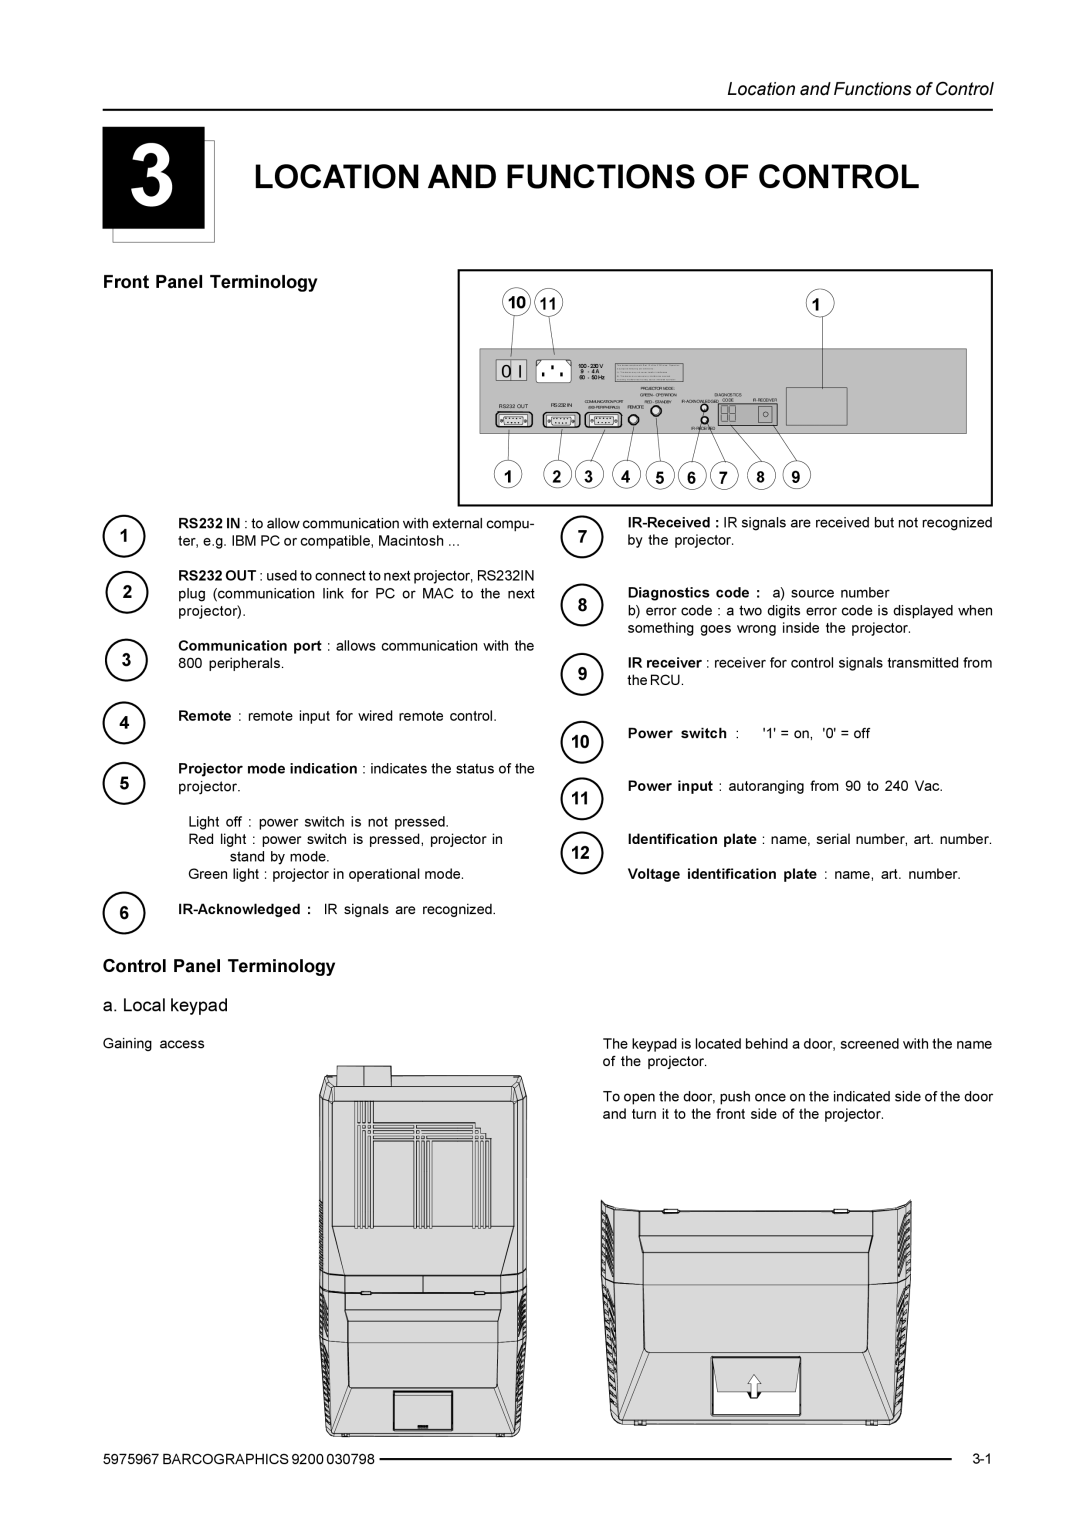 Barco 9200 owner manual Of Control, Location and Functions of Control, Front Panel Terminology 